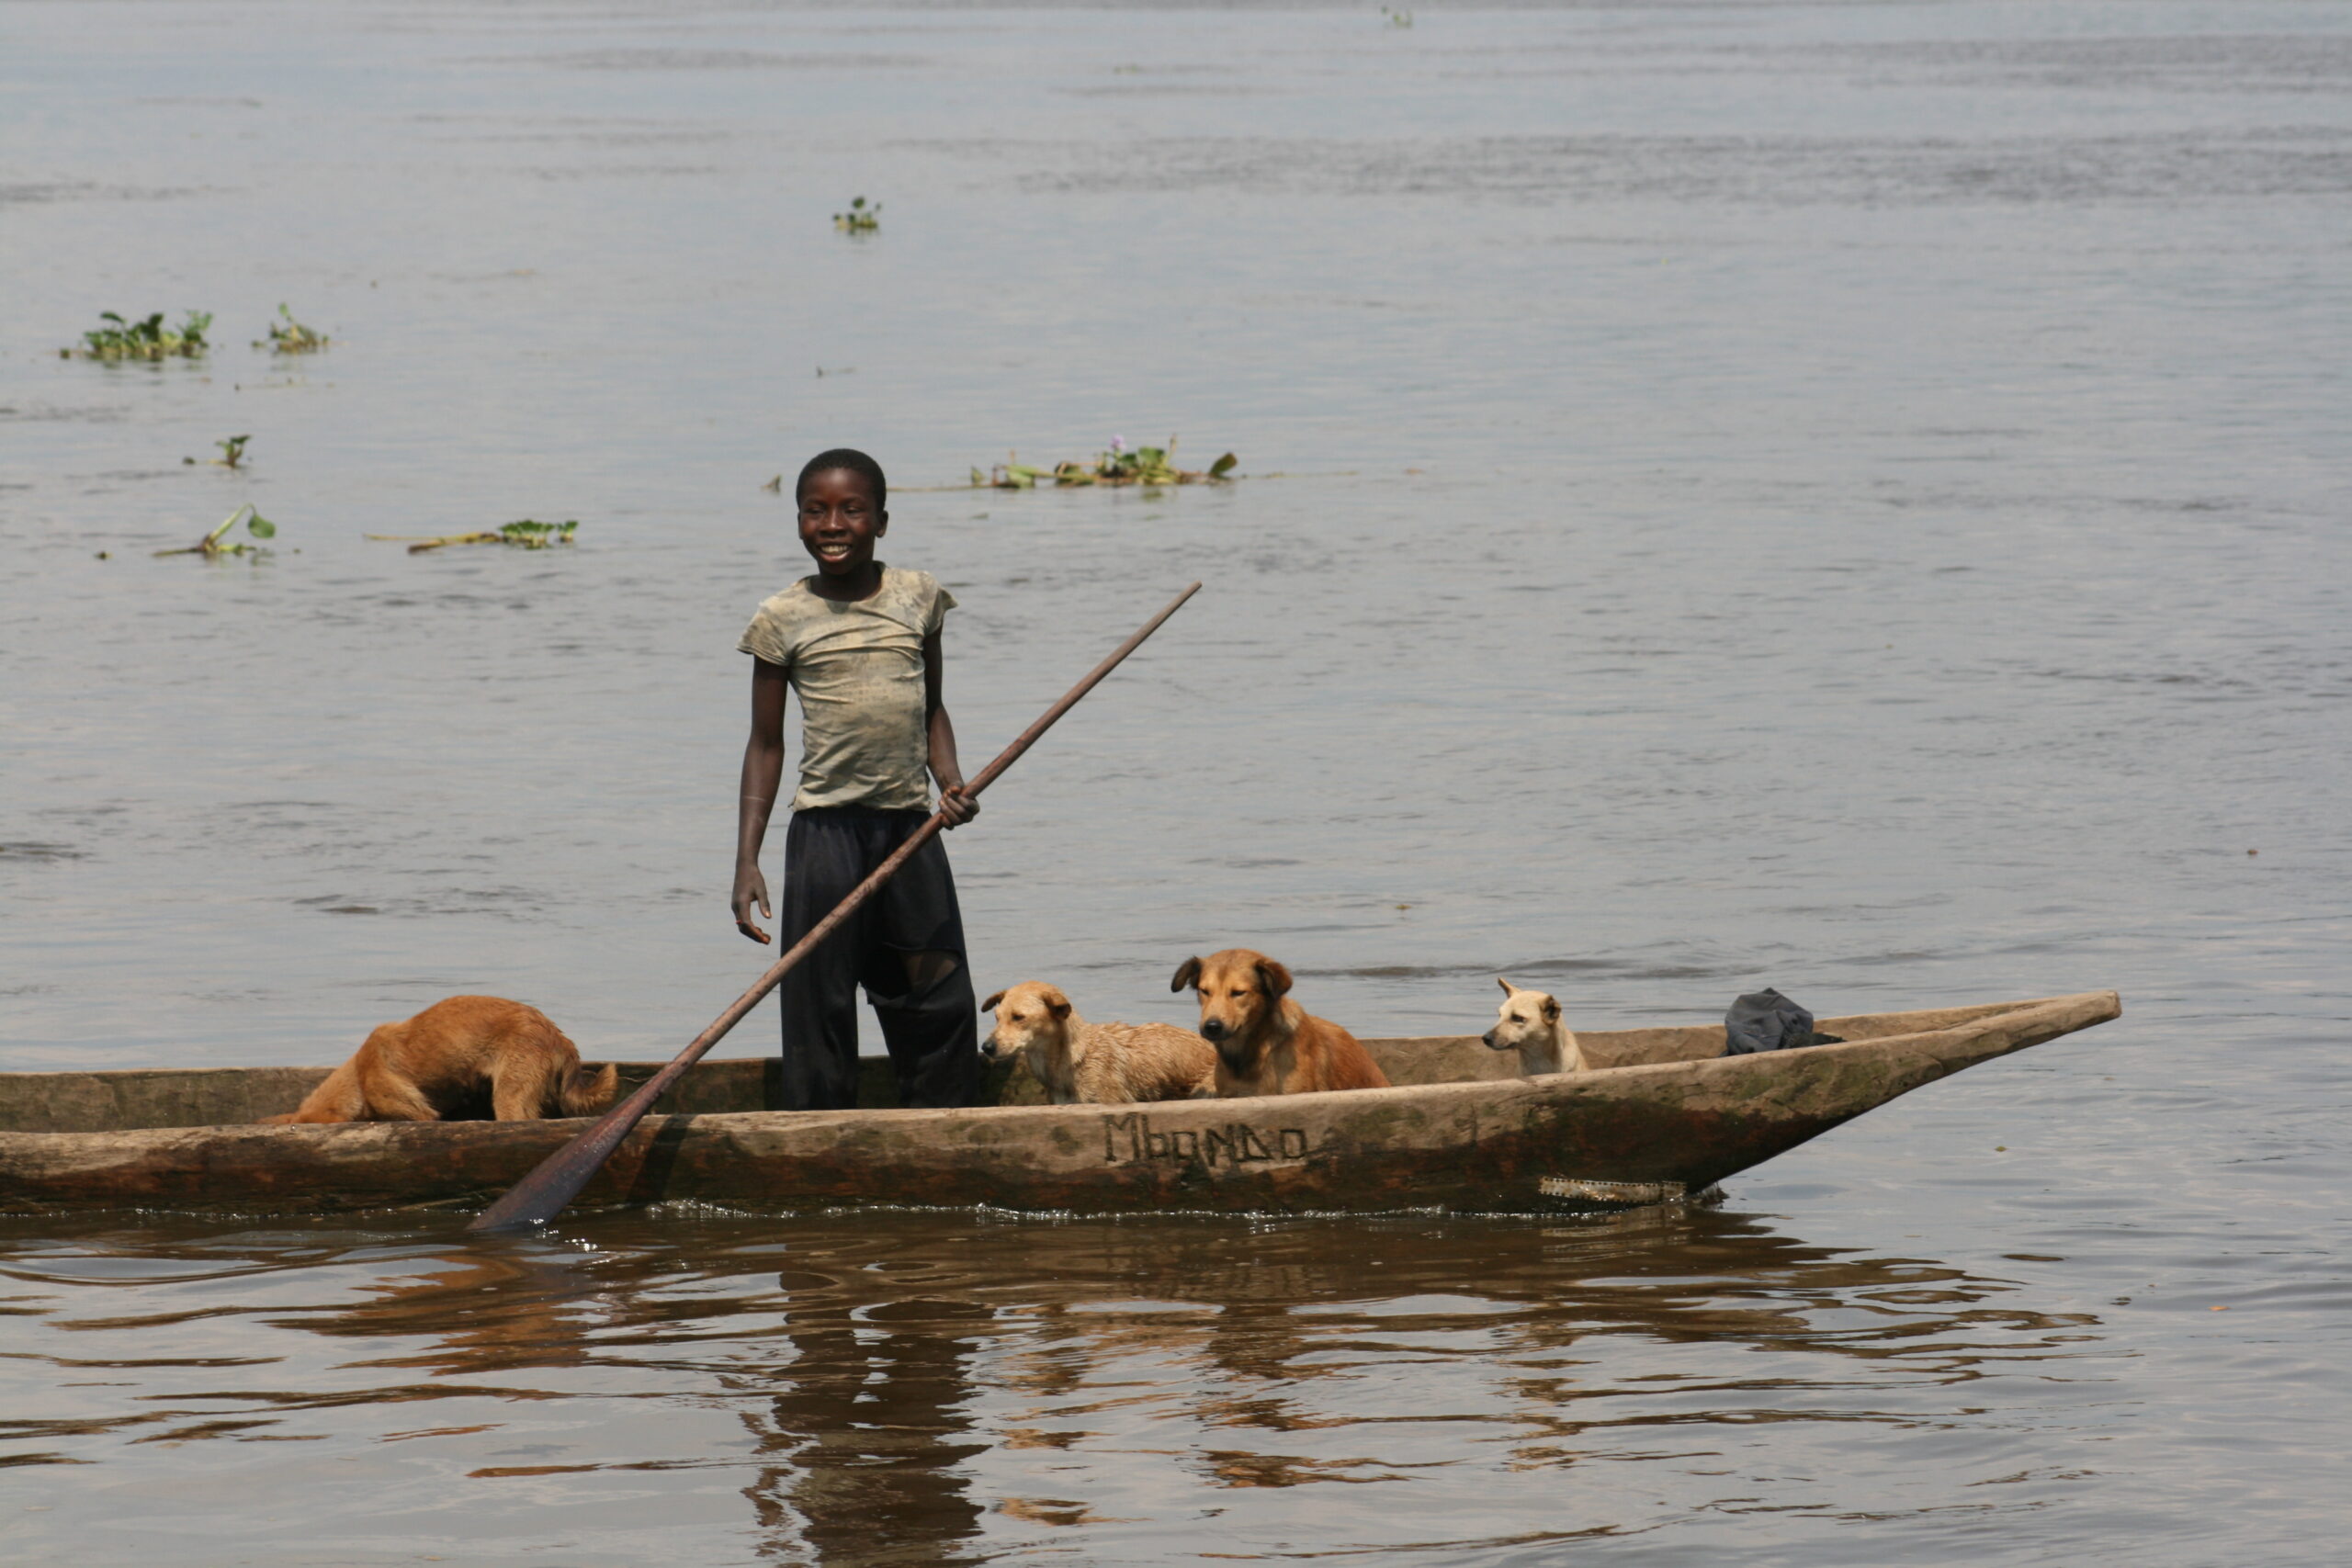 Child with dogs in pirogue